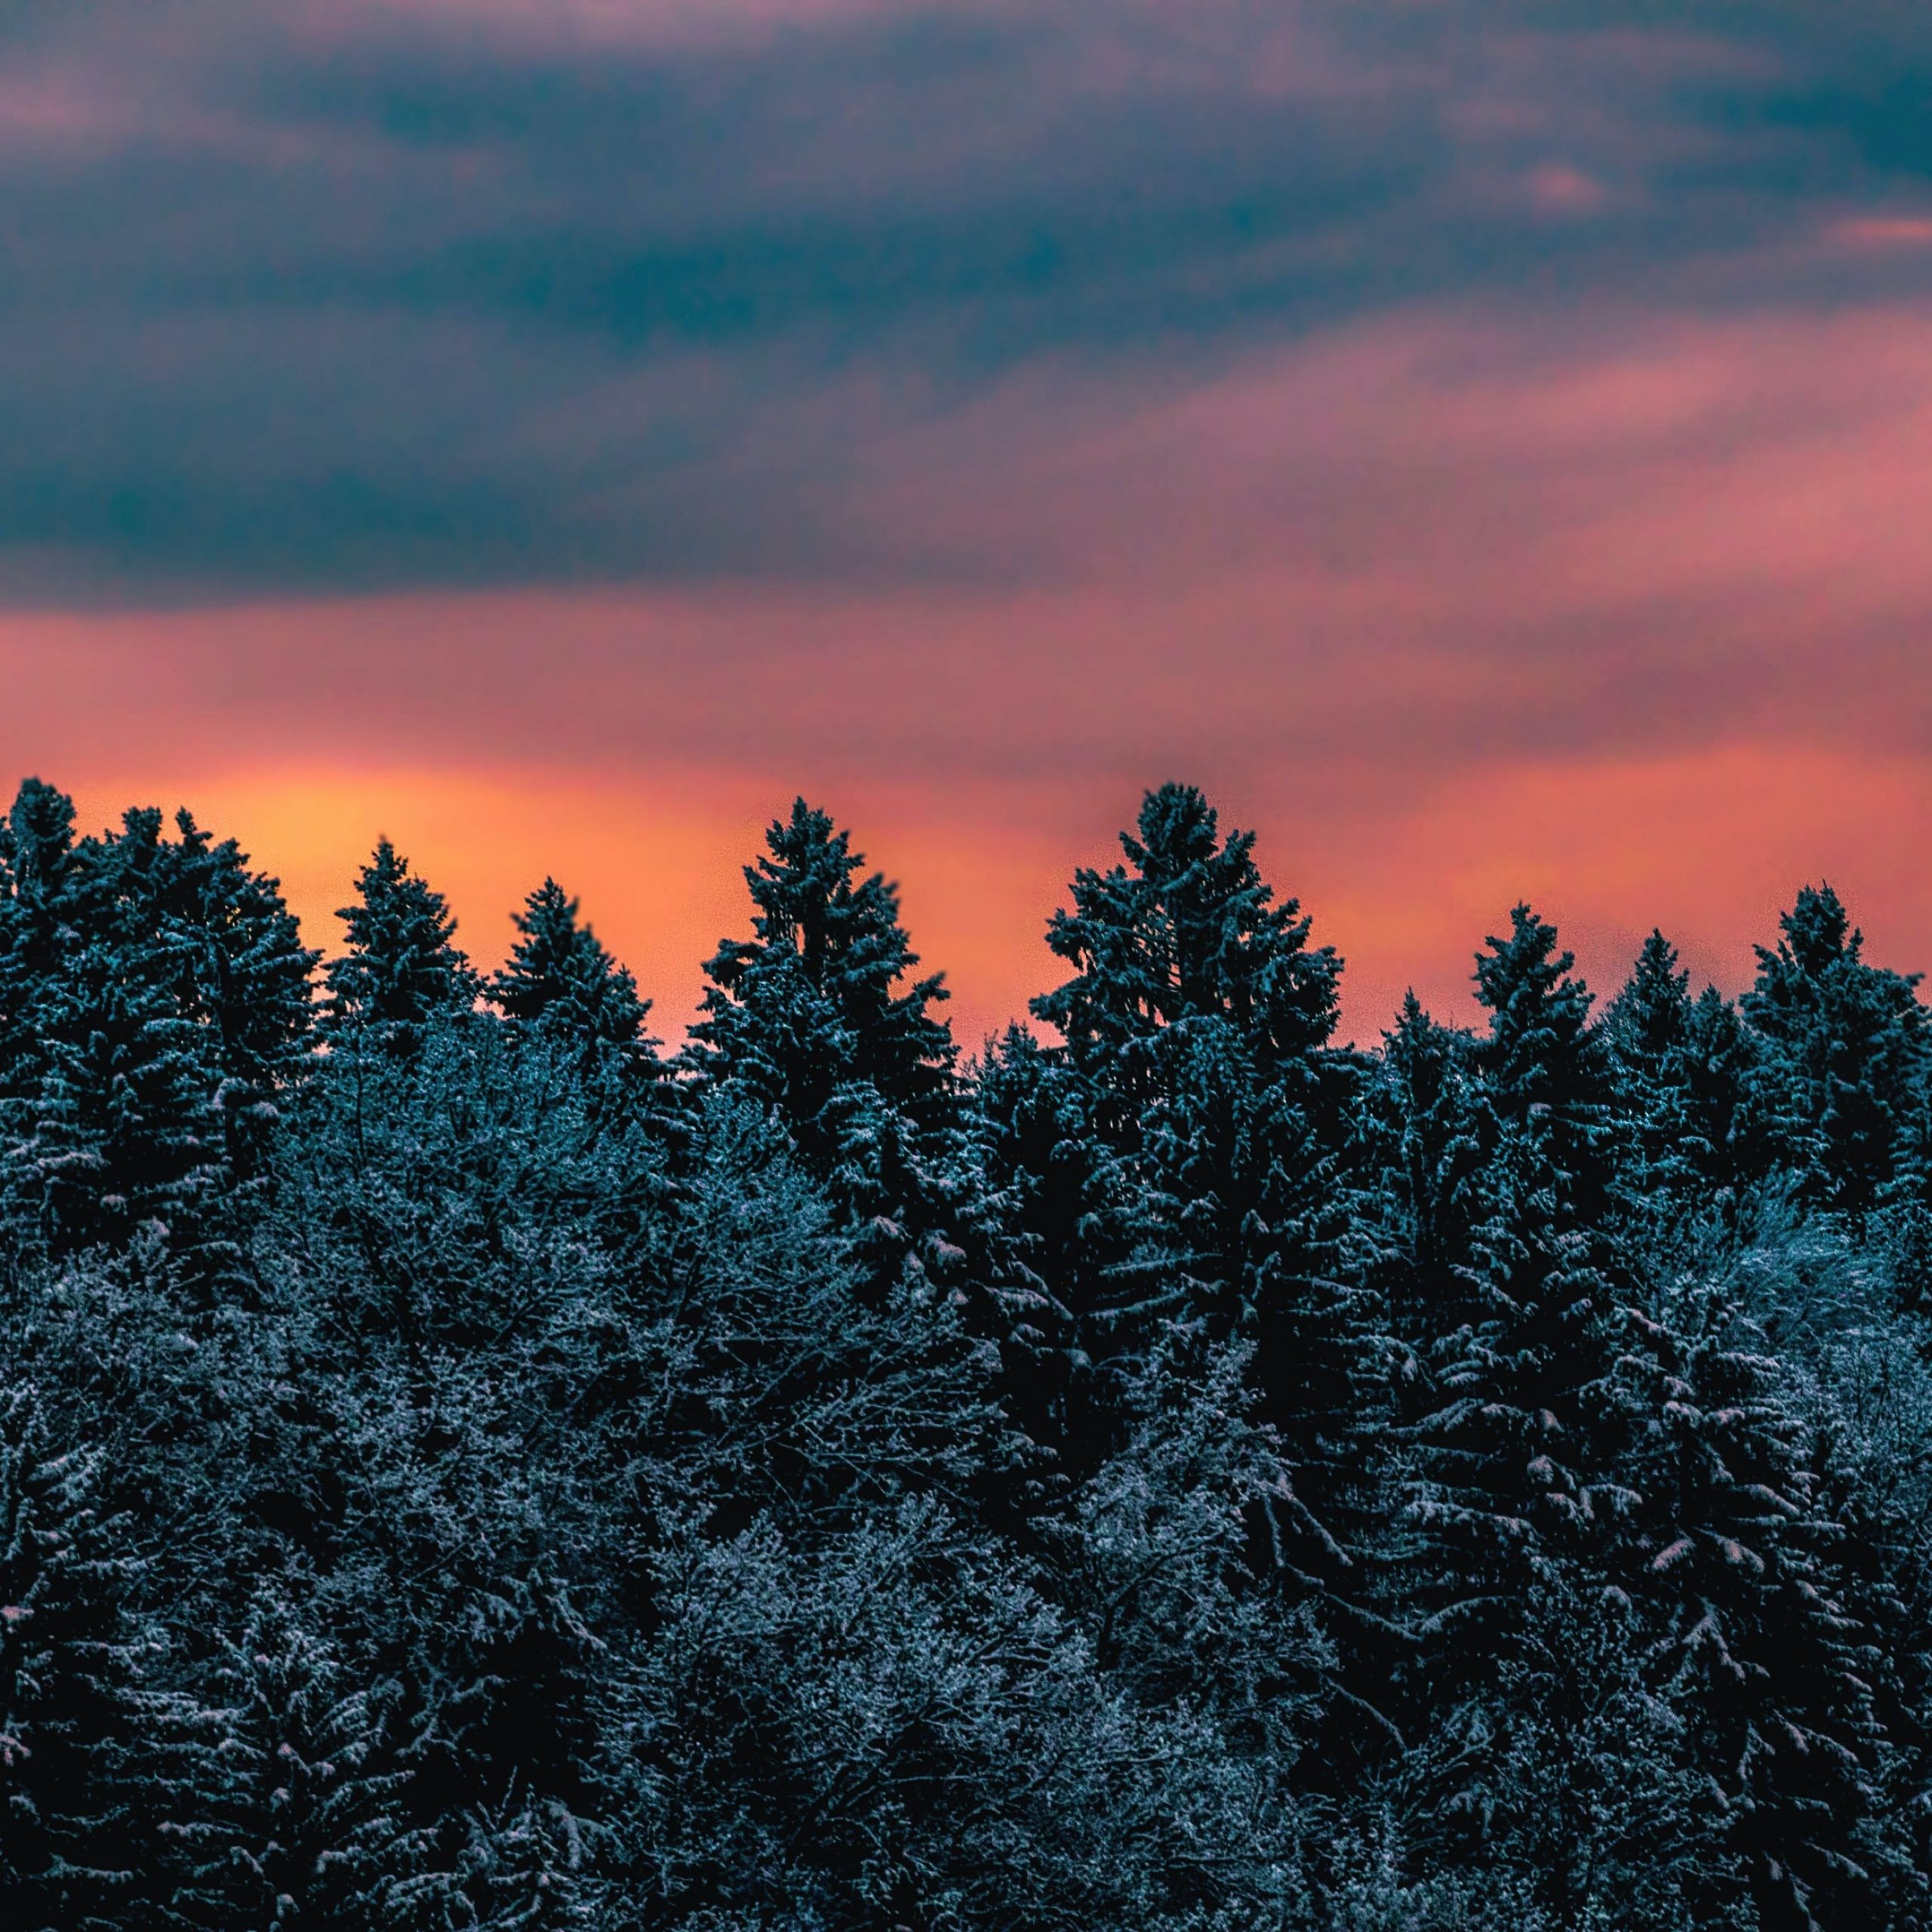 A red sunset over the snow covered trees - Twilight